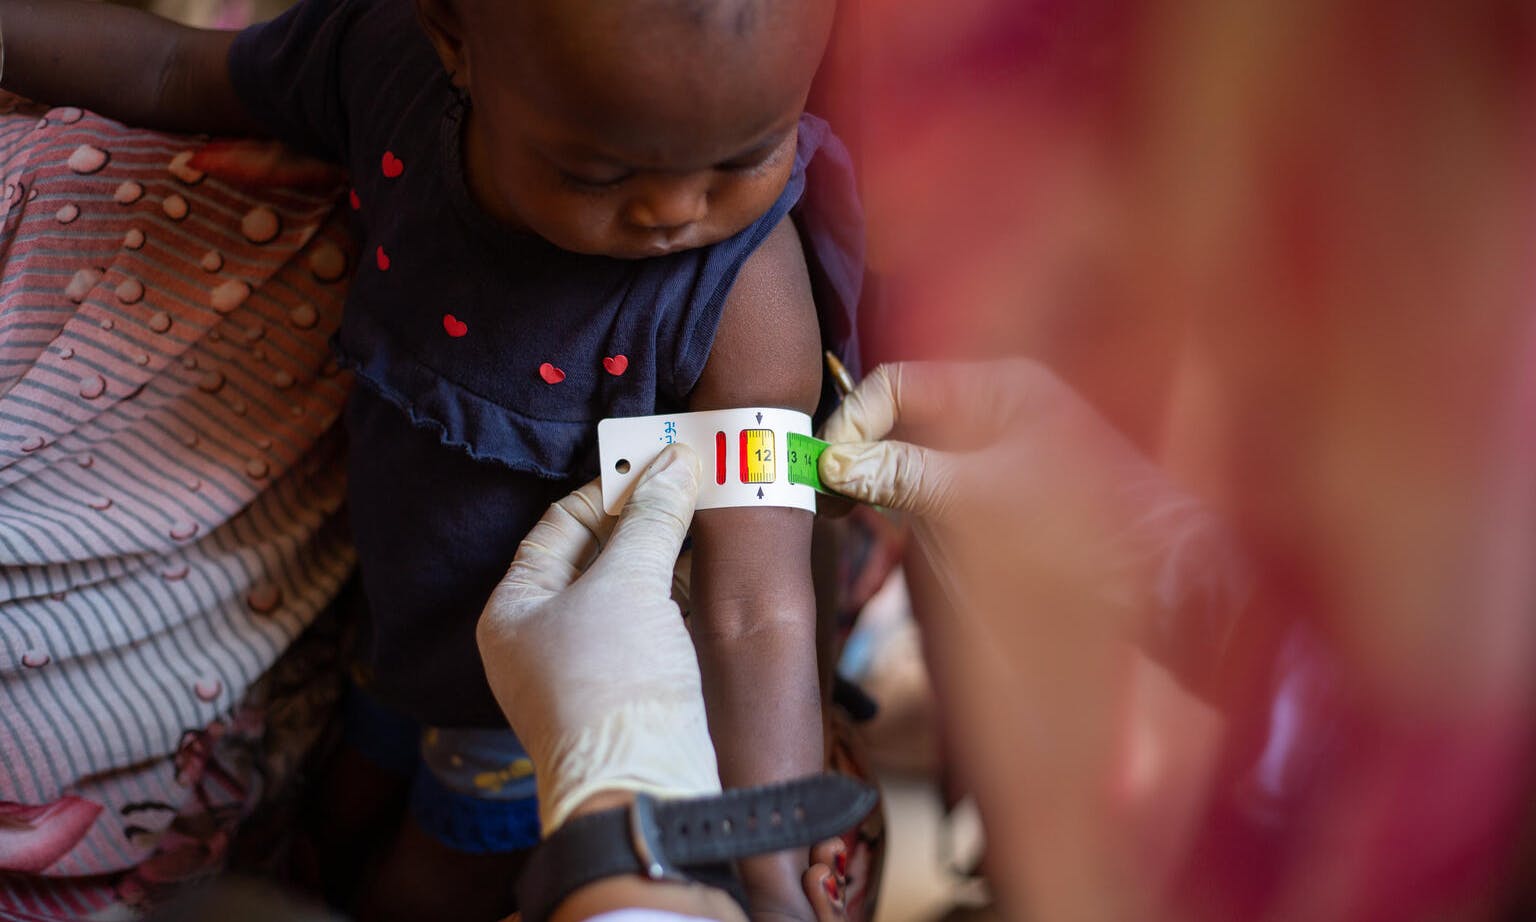 Catching signs of malnutrition early - a child is screened for malnutrition using a MUAC band